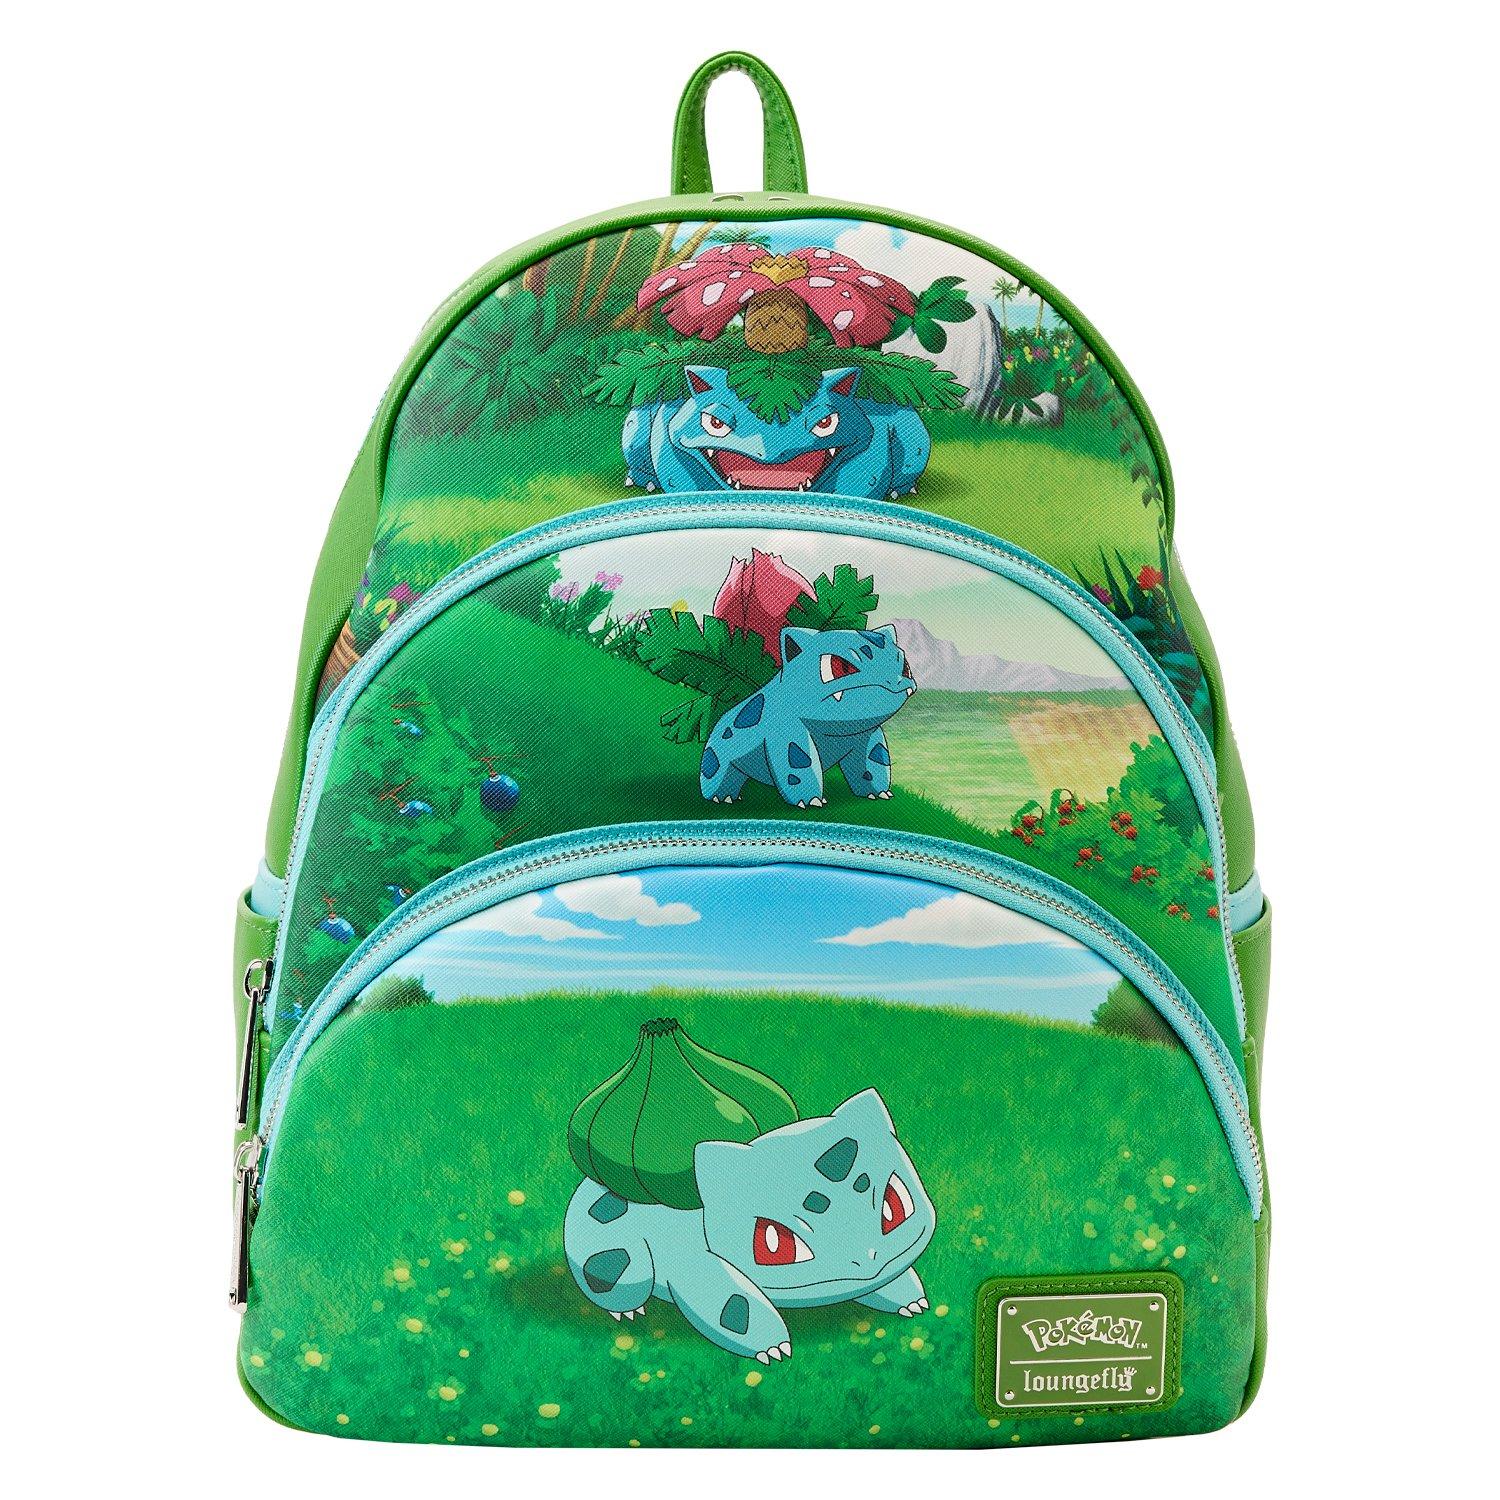 DISO Bulbasaur! Any condition! Please help me find him!! 🙏🏻🙏🏻🙏🏻 : r/ Loungefly